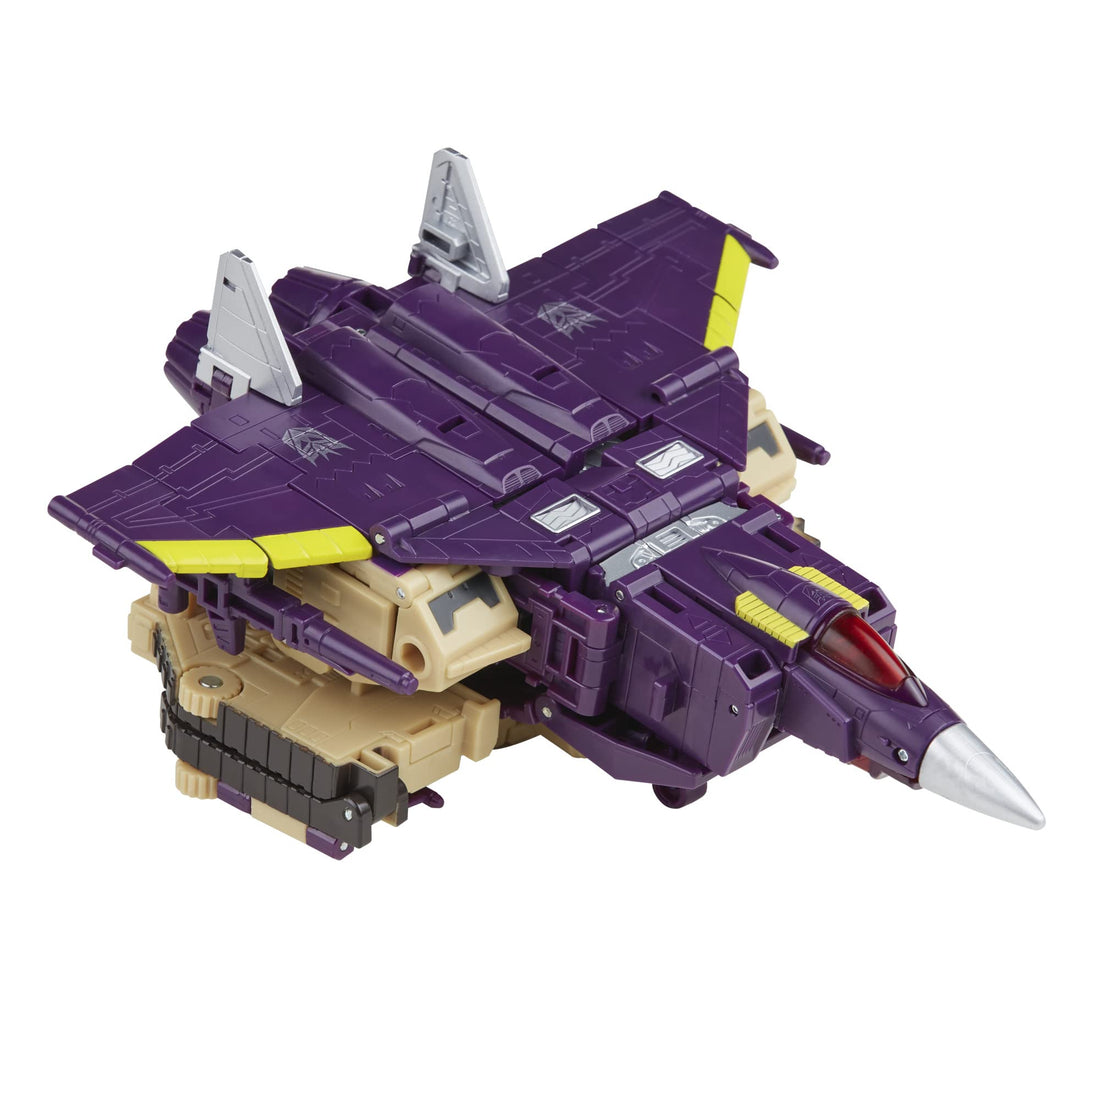 Transformers Toys Generations Legacy Series Leader Blitzwing Triple ChangerAction Figure - 8 and Up, 7-inch, Multicolour (F3062)